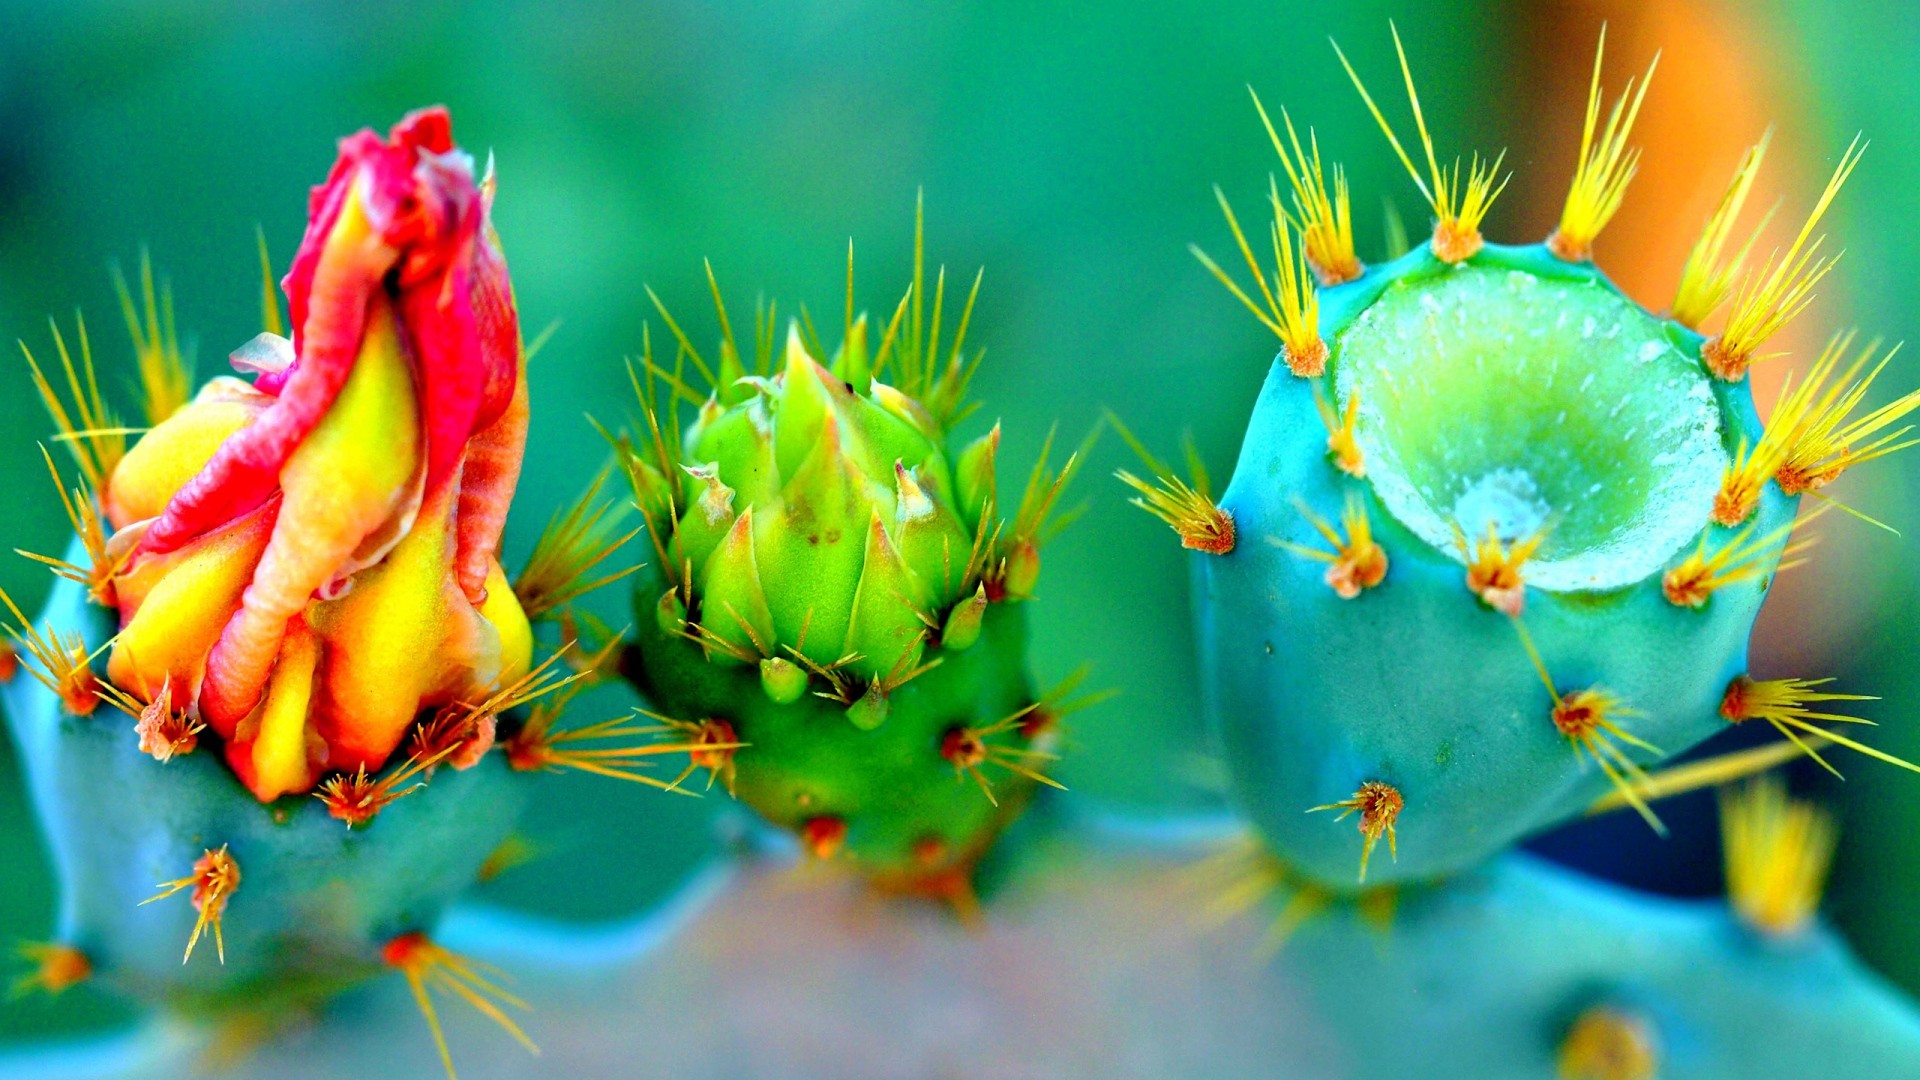 Nature Flowers Closeup Thorns Colorful Macro Depth Of Field Vibrant Cactus Turquoise Green 1920x1080